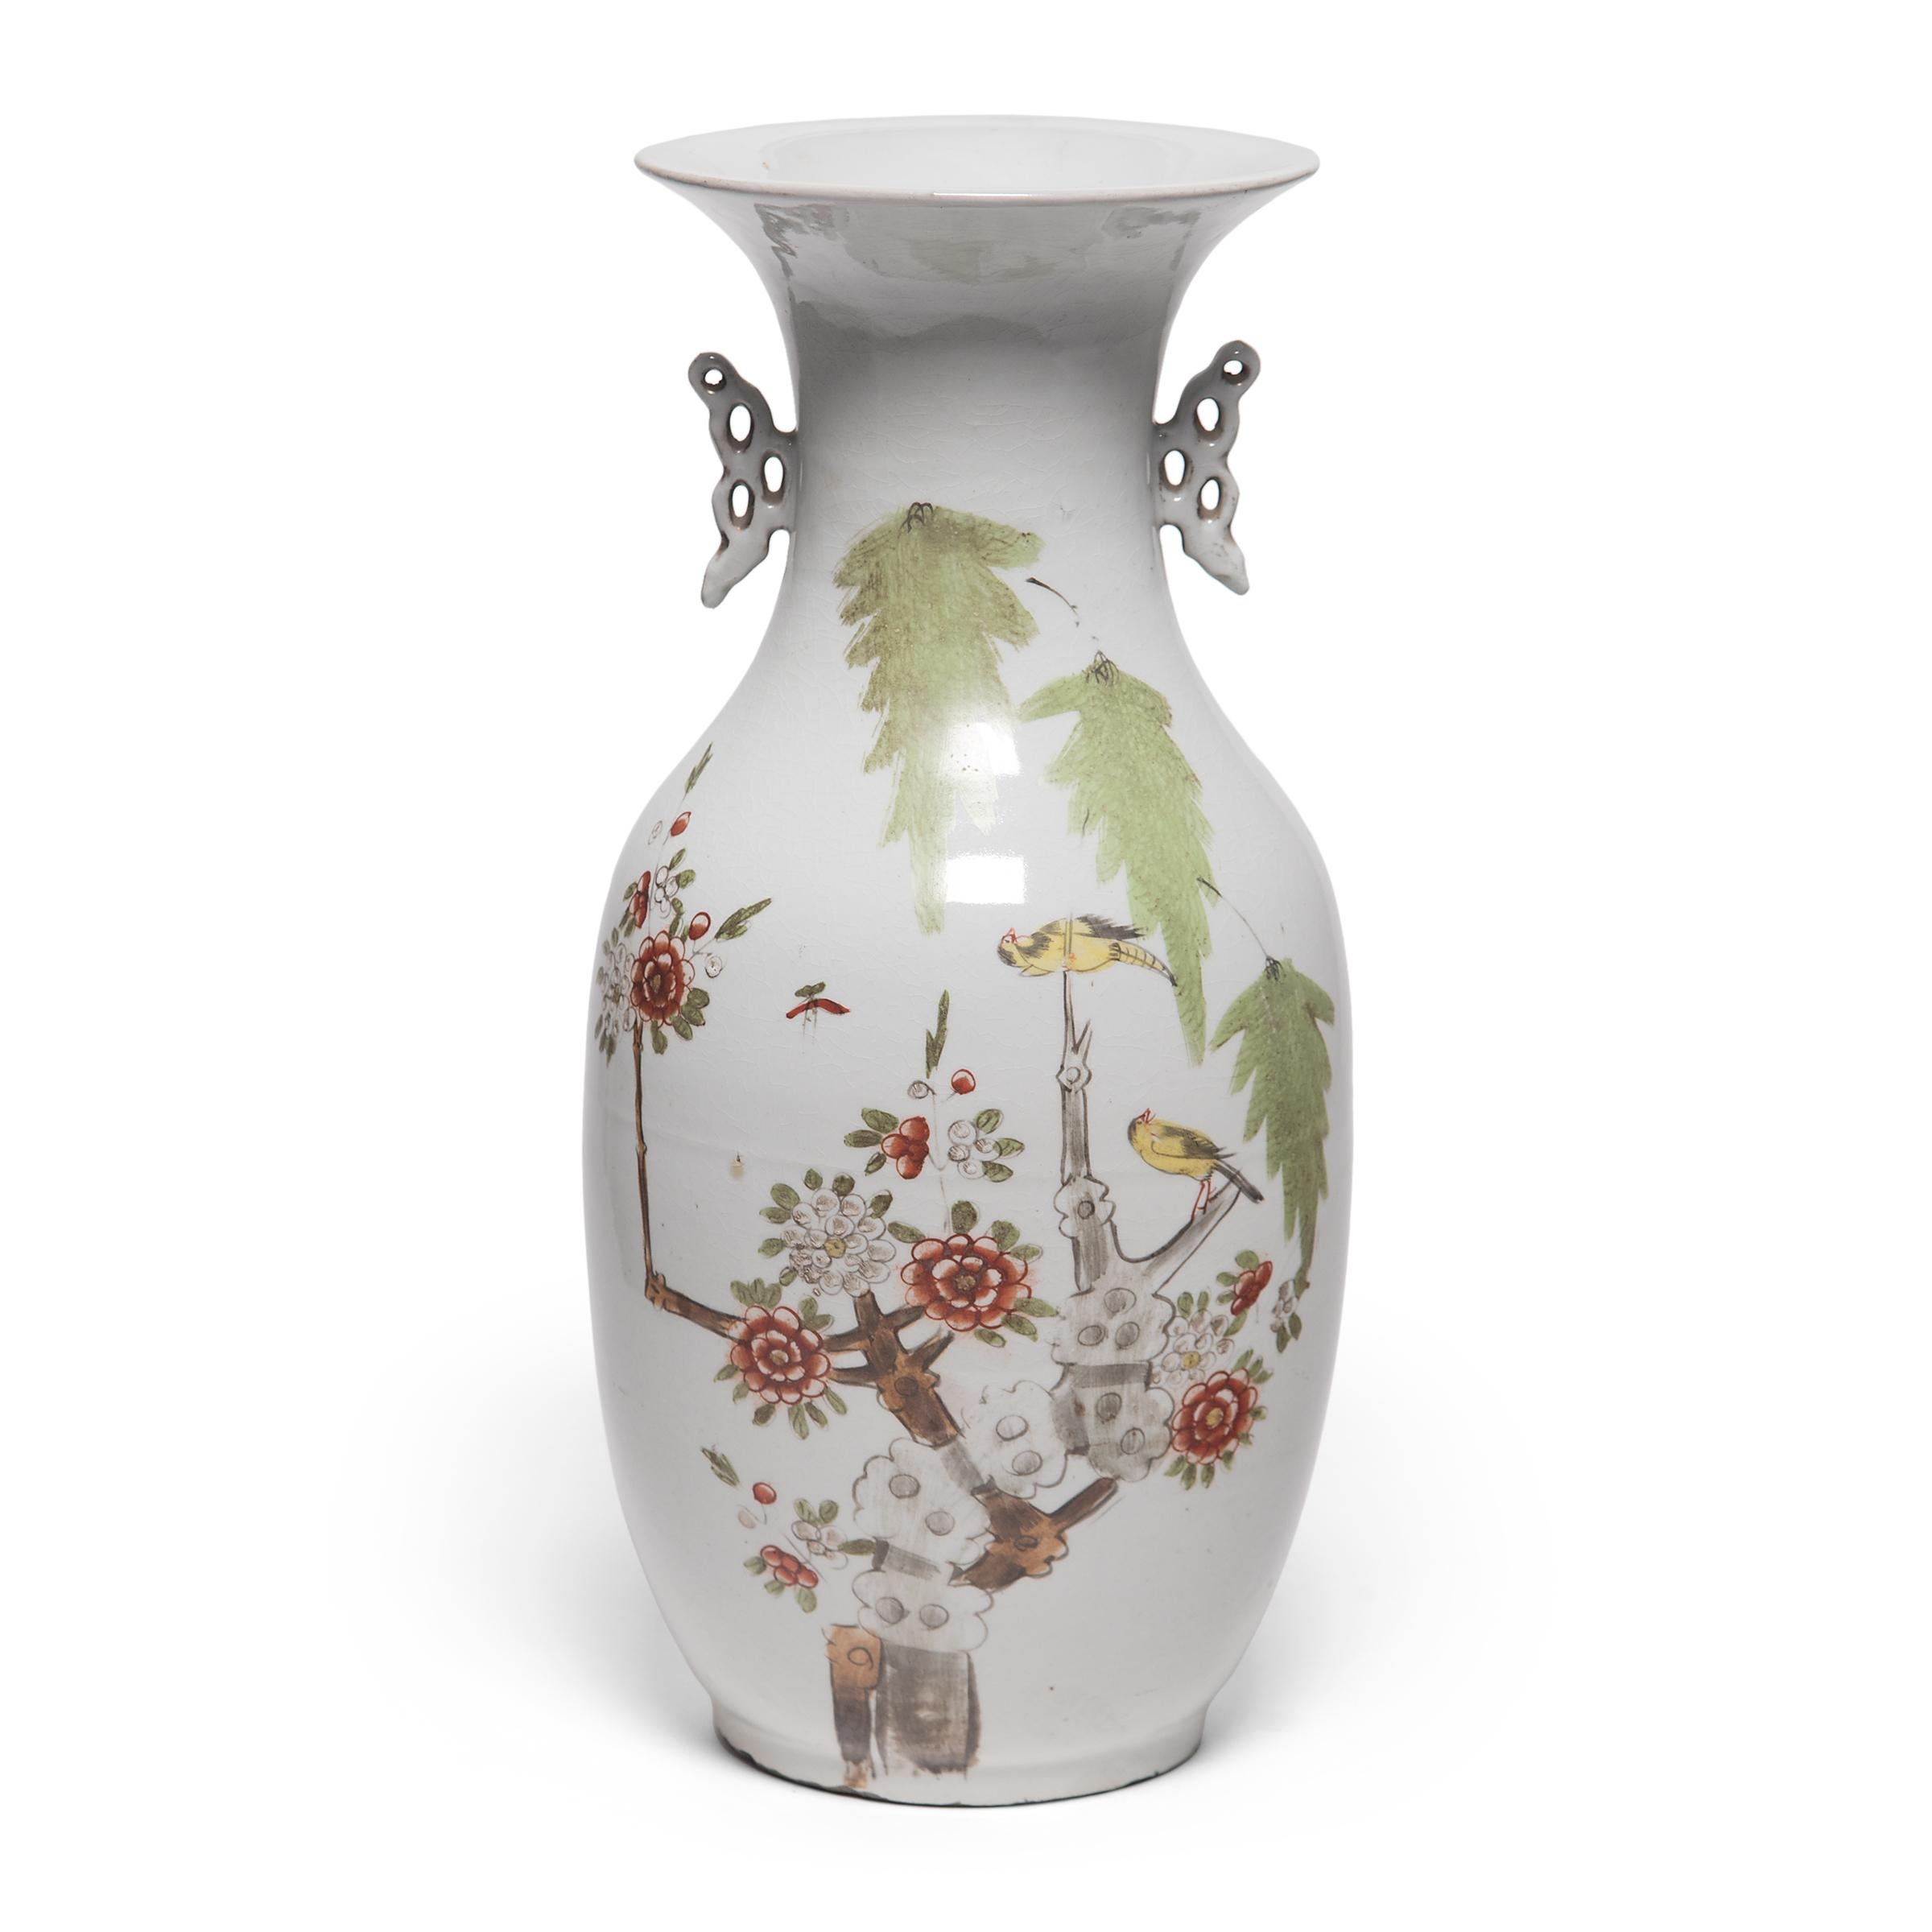 Sculpted in a traditional Chinese phoenix tail vase form, these elegant early 20th century vases are adorned with scenes of magpies flitting between branches of cherry blossoms. Regarded as a bird of good omen, magpies bring joy and good fortune to